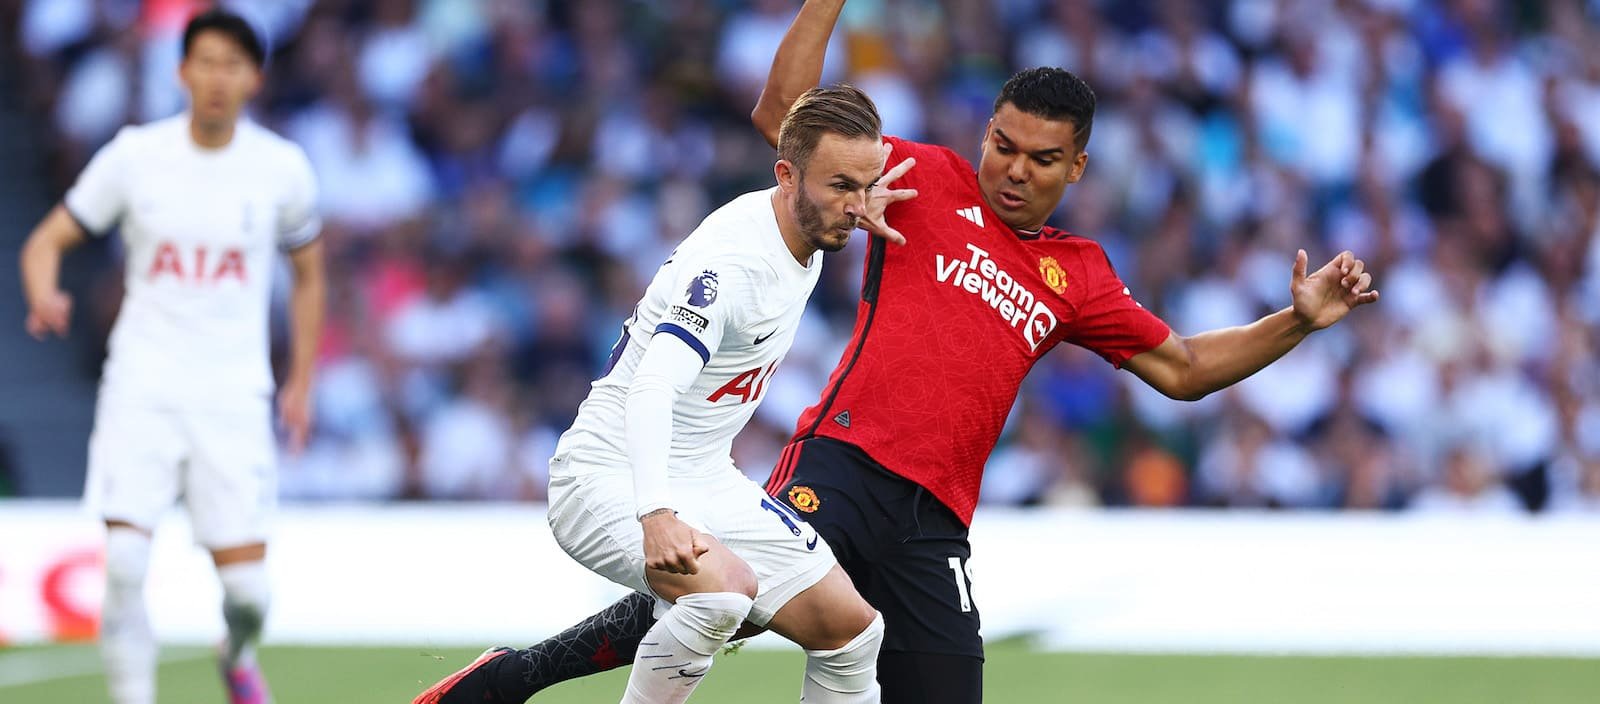 Casemiro’s agent offering his services to Al Nassr – Man United News And Transfer News